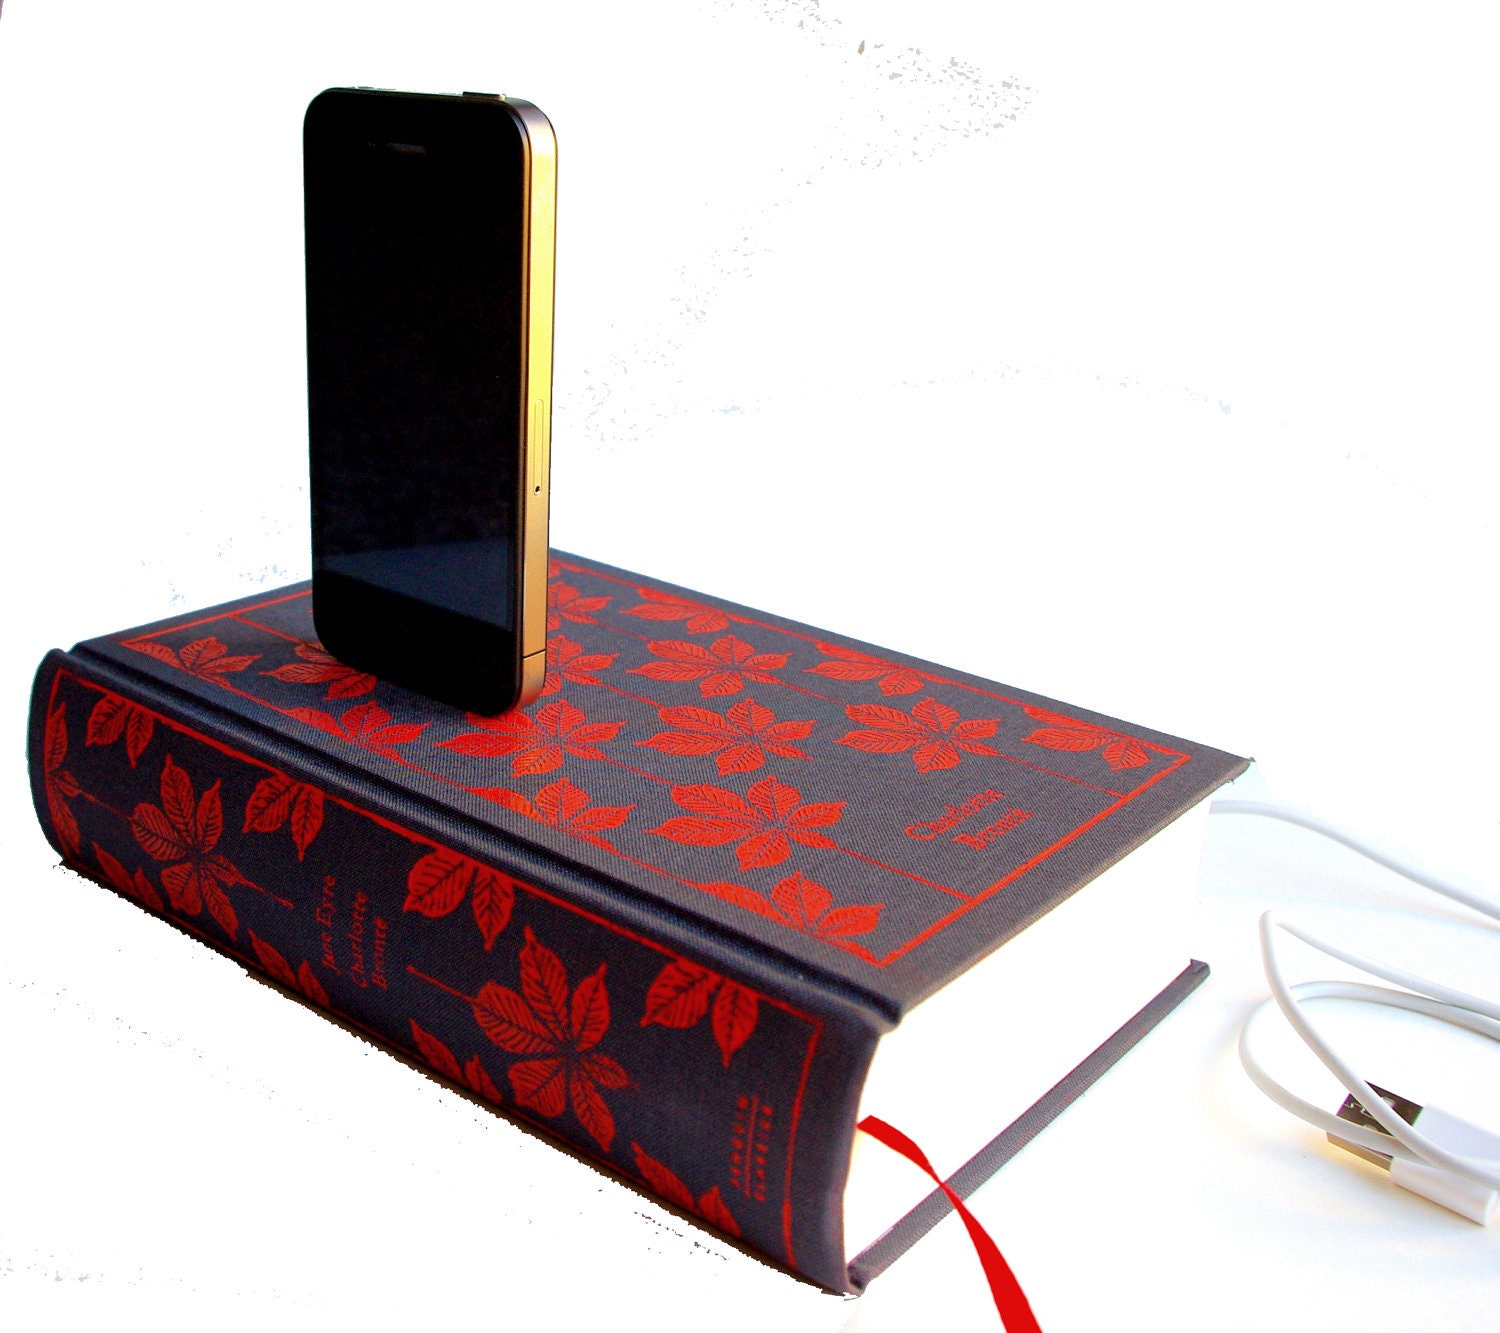 Jane Eyre Book Charging Dock for iPhone and iPod - Holiday Special